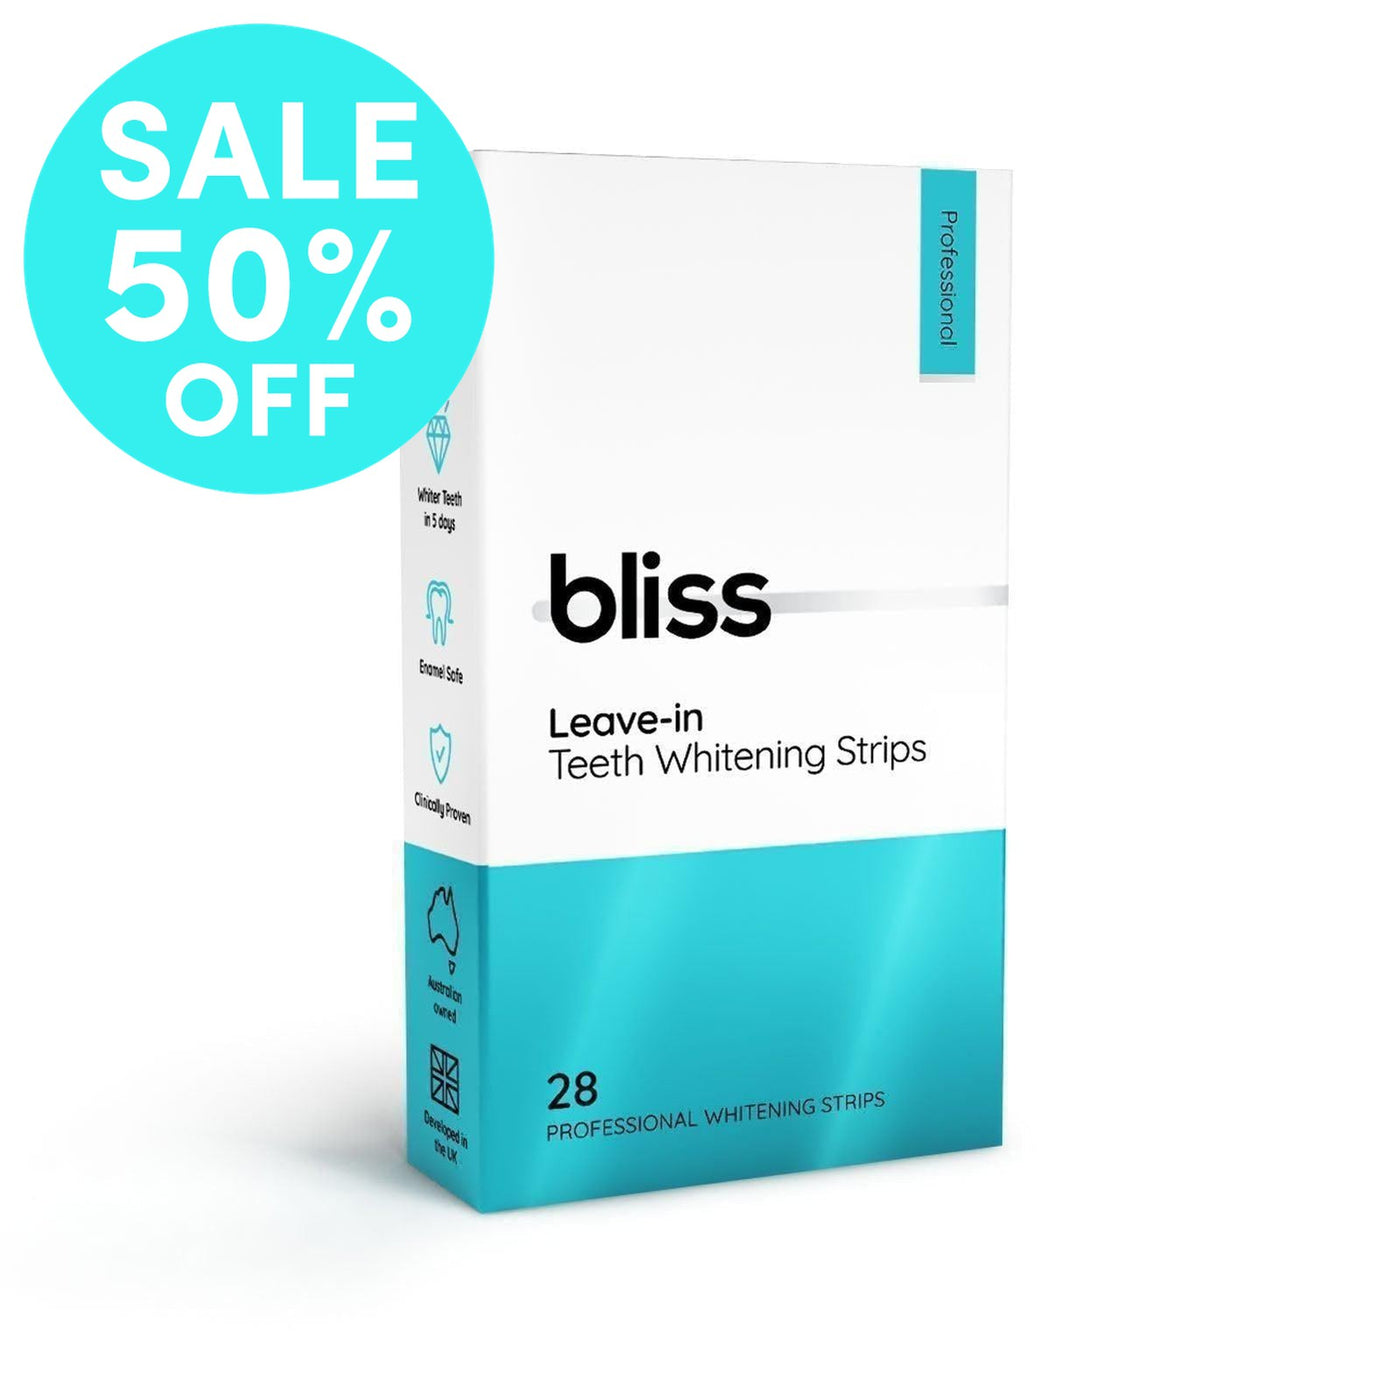 Leave-in Teeth Whitening Strips (28 Pack) - Bliss Oral Care